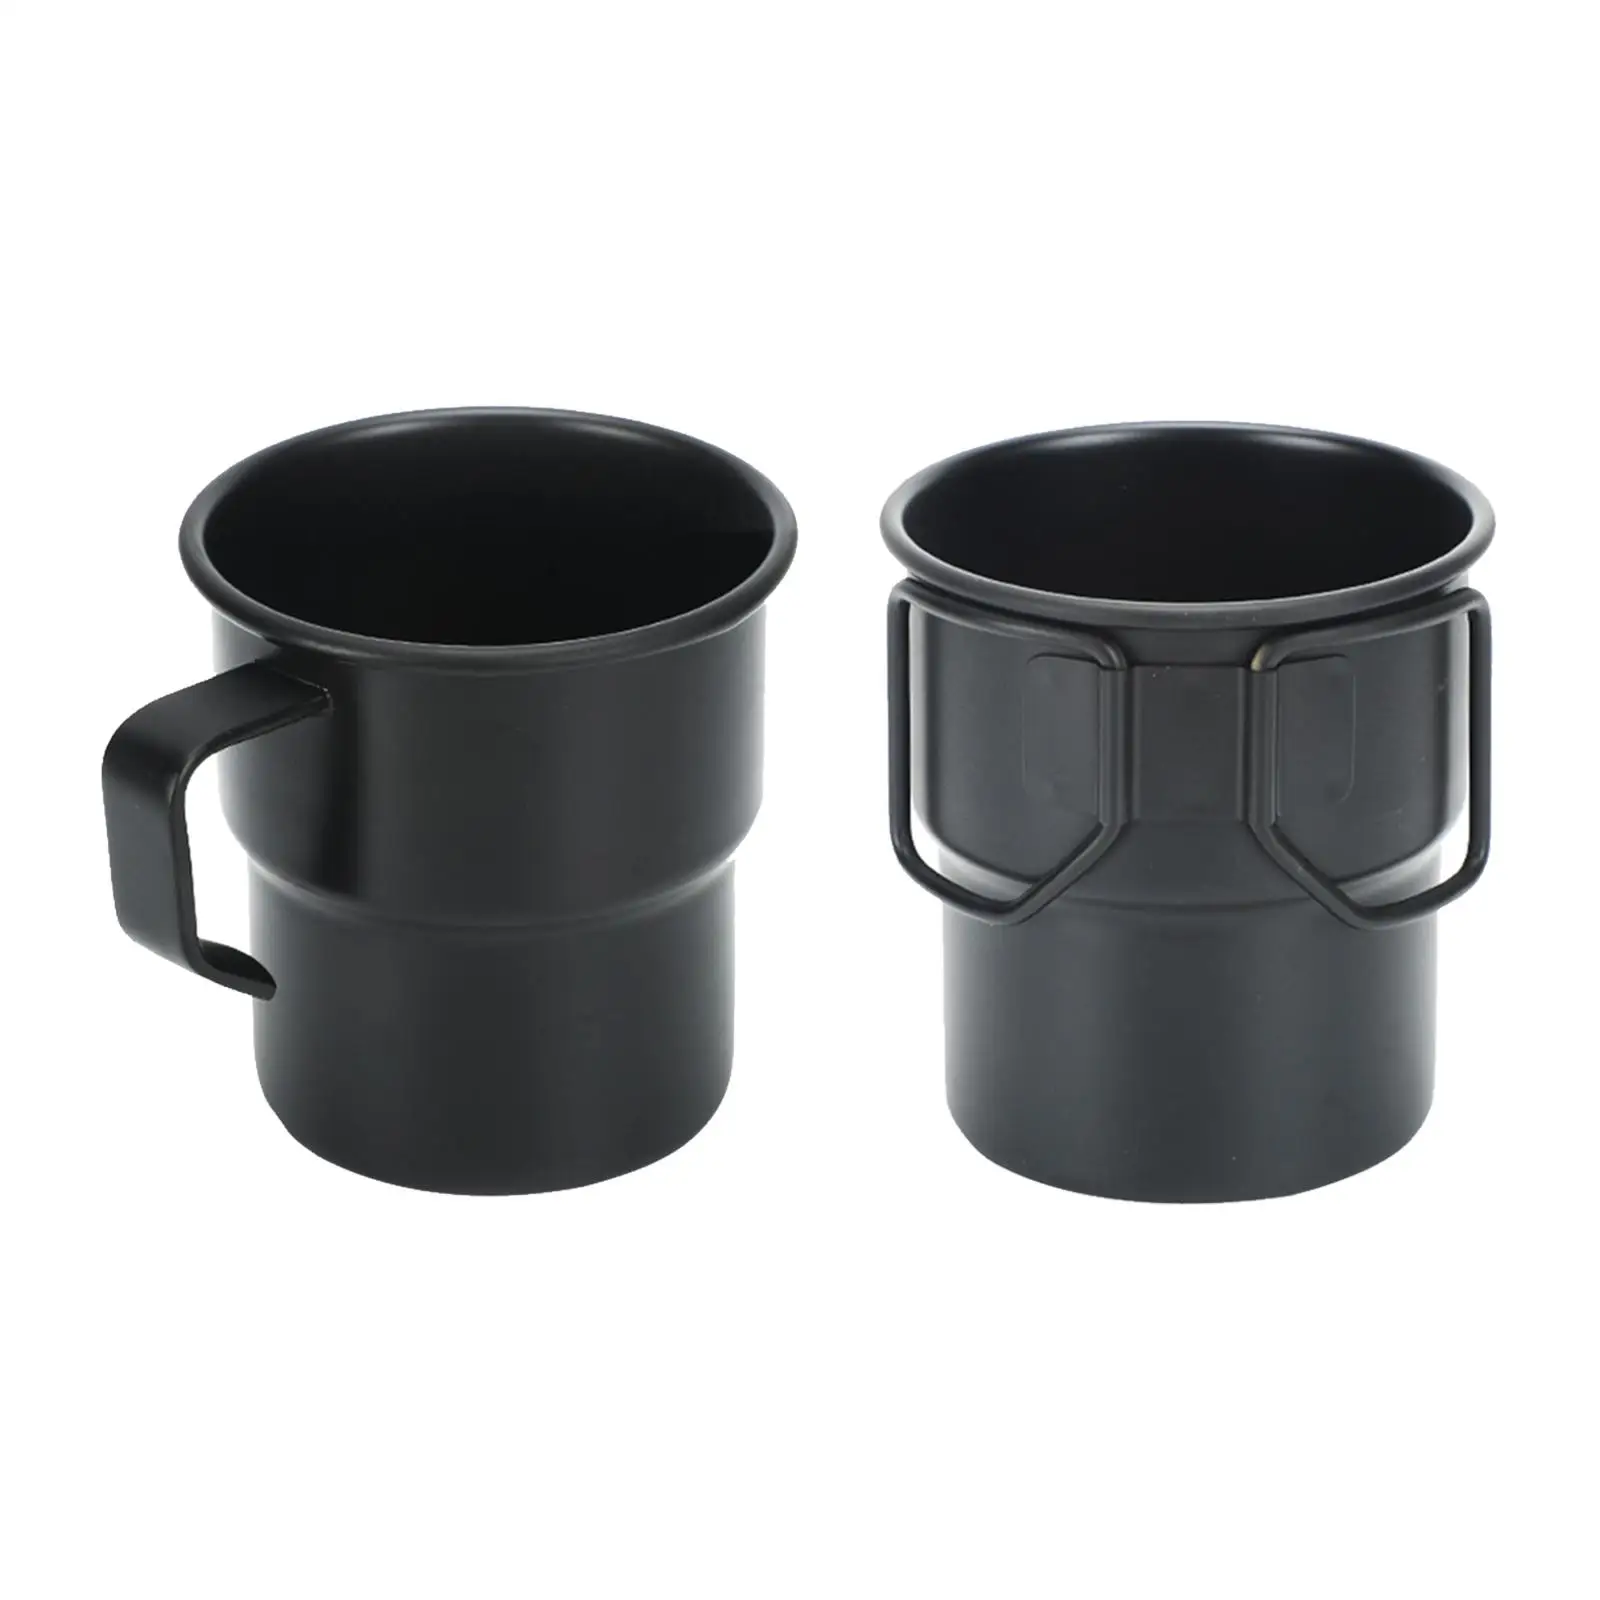 Stainless Steel Camping Cup Cookware 300ml Outdoor Tea Coffee Mug for Picnic